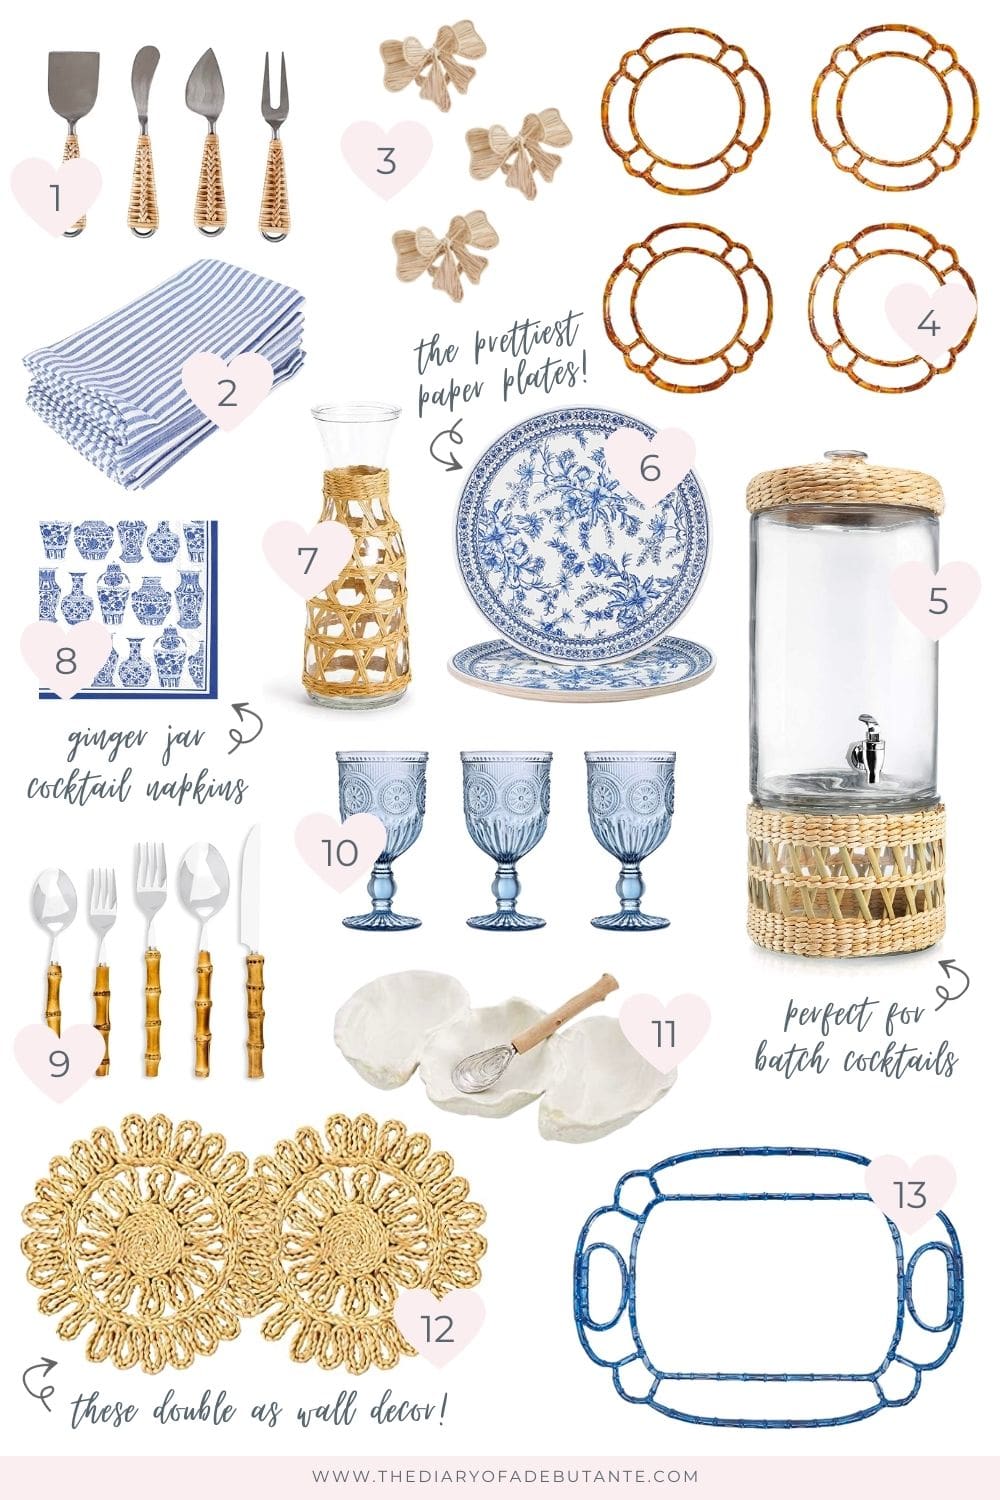 Blogger Stephanie Ziajka rounds up her favorite Amazon summer entertaining ideas, all of which would make great summer hostess gifts, on Diary of a Debutante